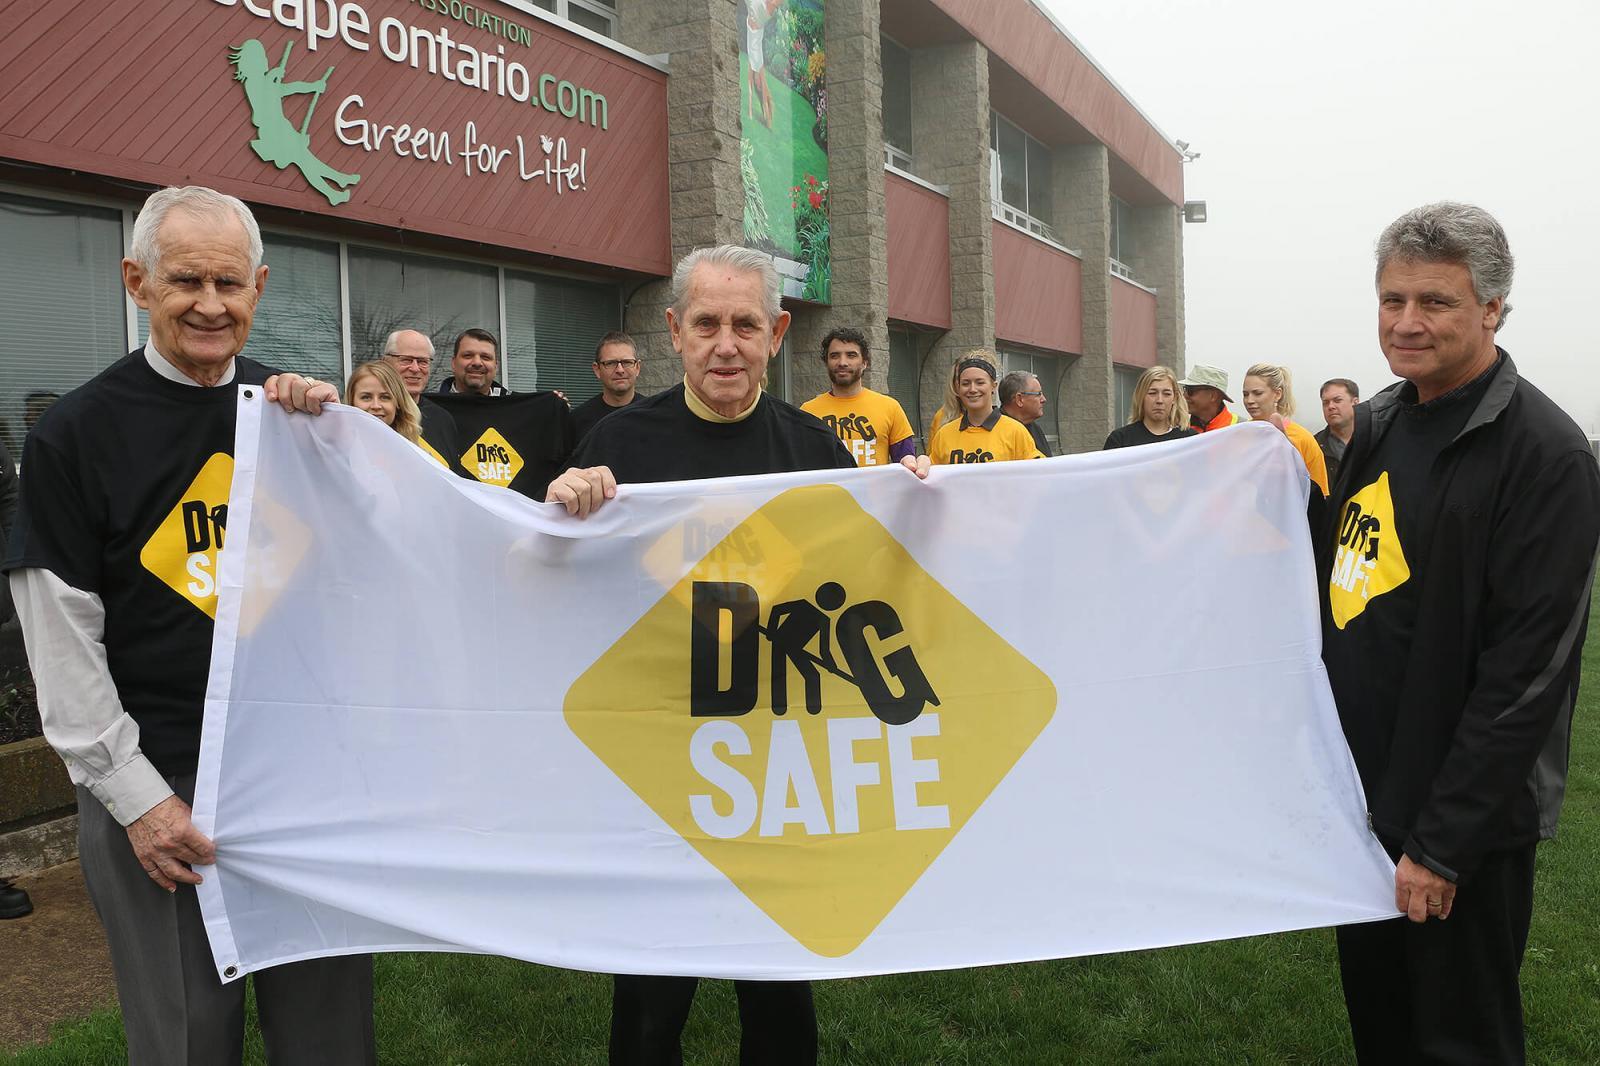 Milton Mayor Gord Krantz (centre), prepares to raise the Dig Safe flag with ORCGA President and CEO, Douglas Lapp (right), and Terry Murphy.